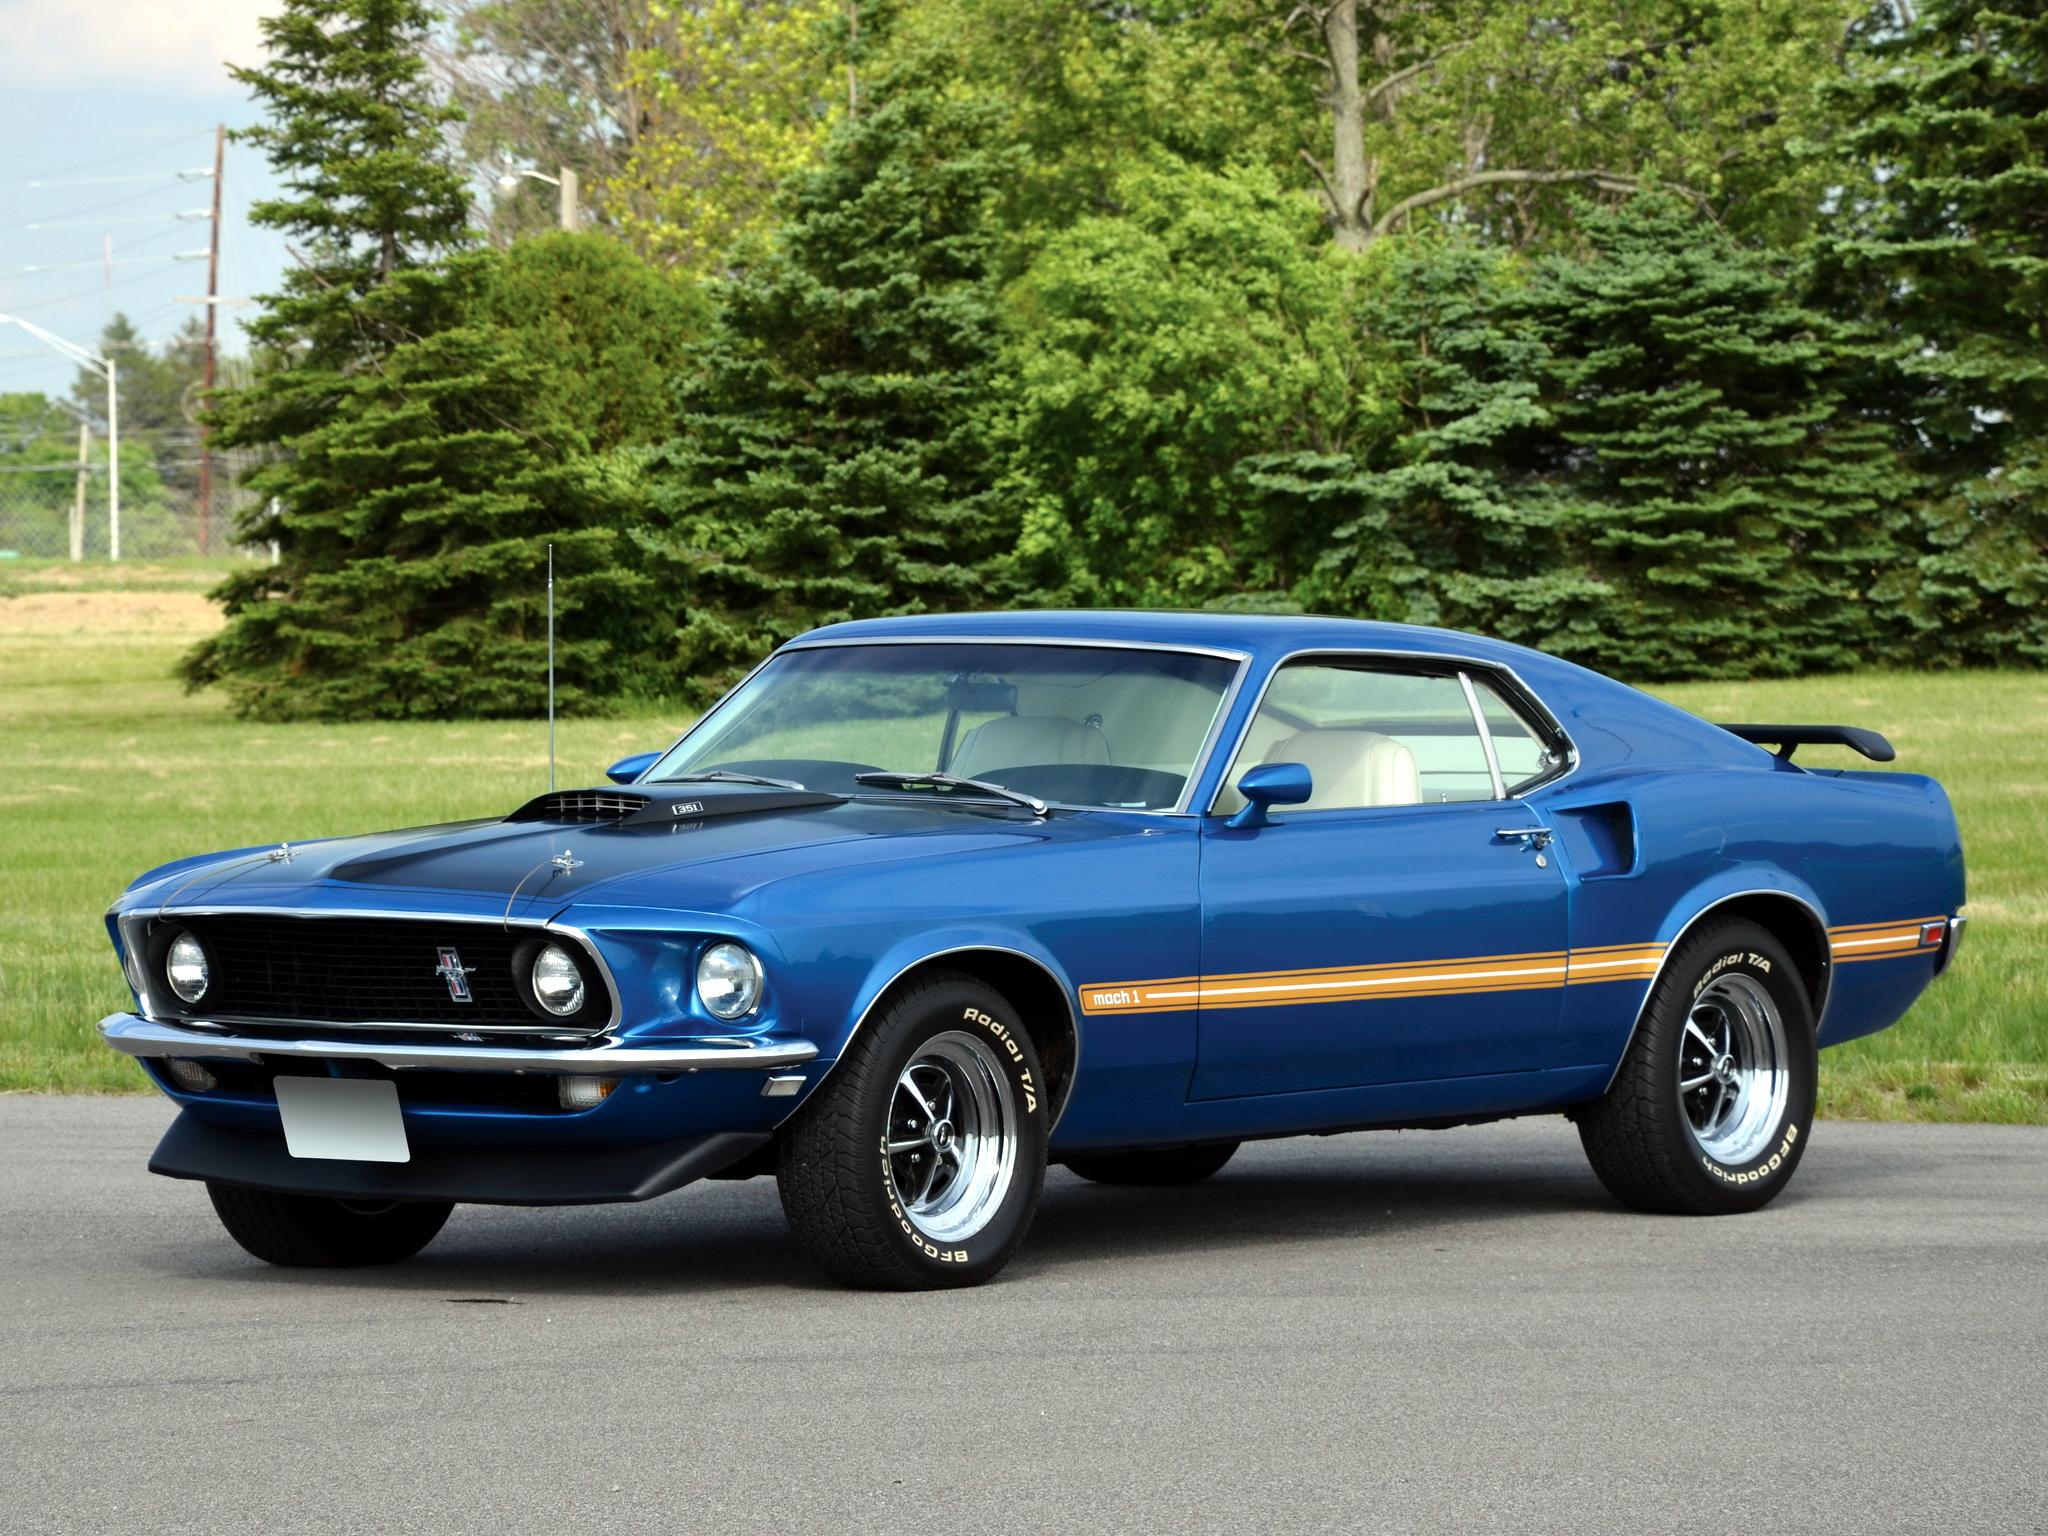 Ford Mustang Mach 1 muscle classic d wallpaperx1536